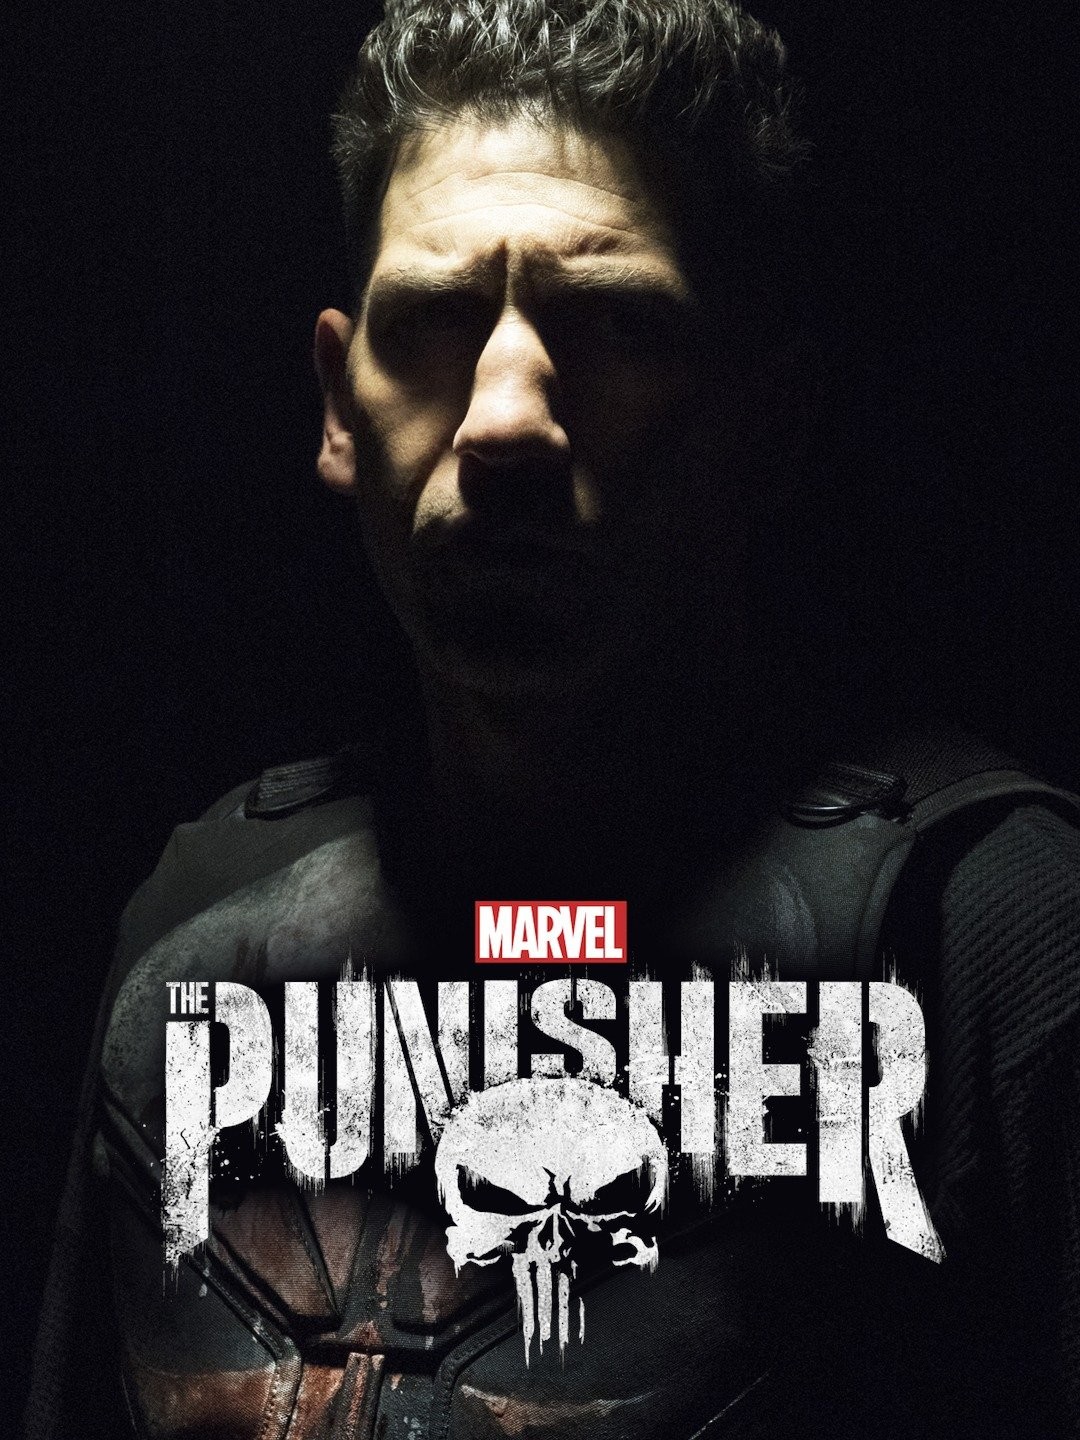 Marvel's The Punisher Season 2 (2018) Synopsis, Cast & Characters, Marvel